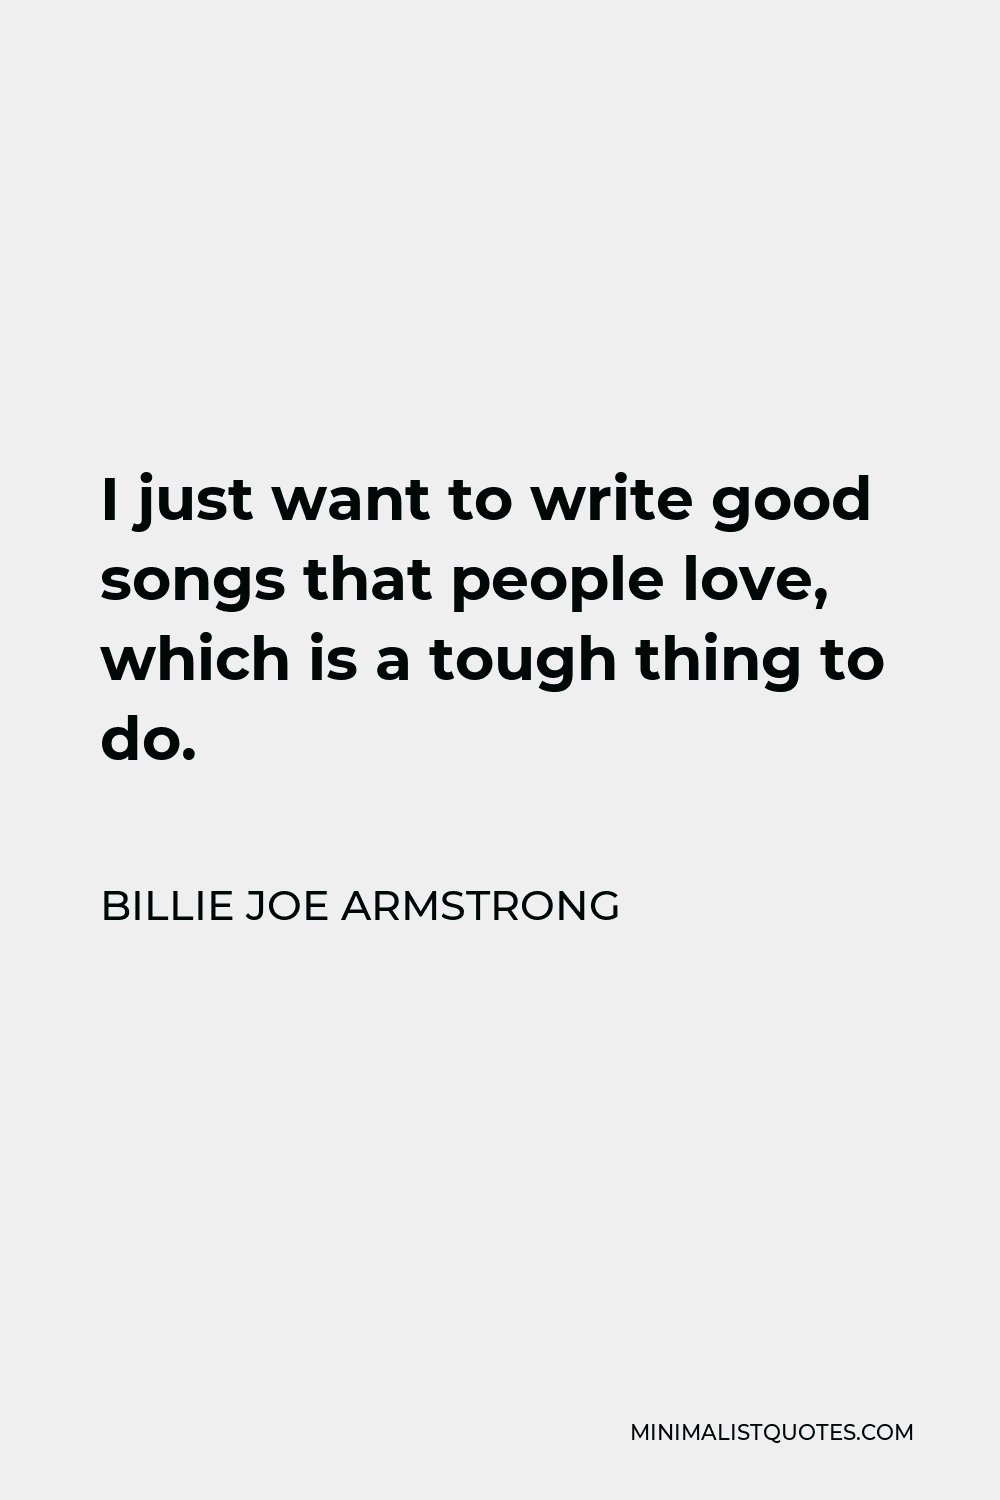 Billie Joe Armstrong Quote - I just want to write good songs that people love, which is a tough thing to do.